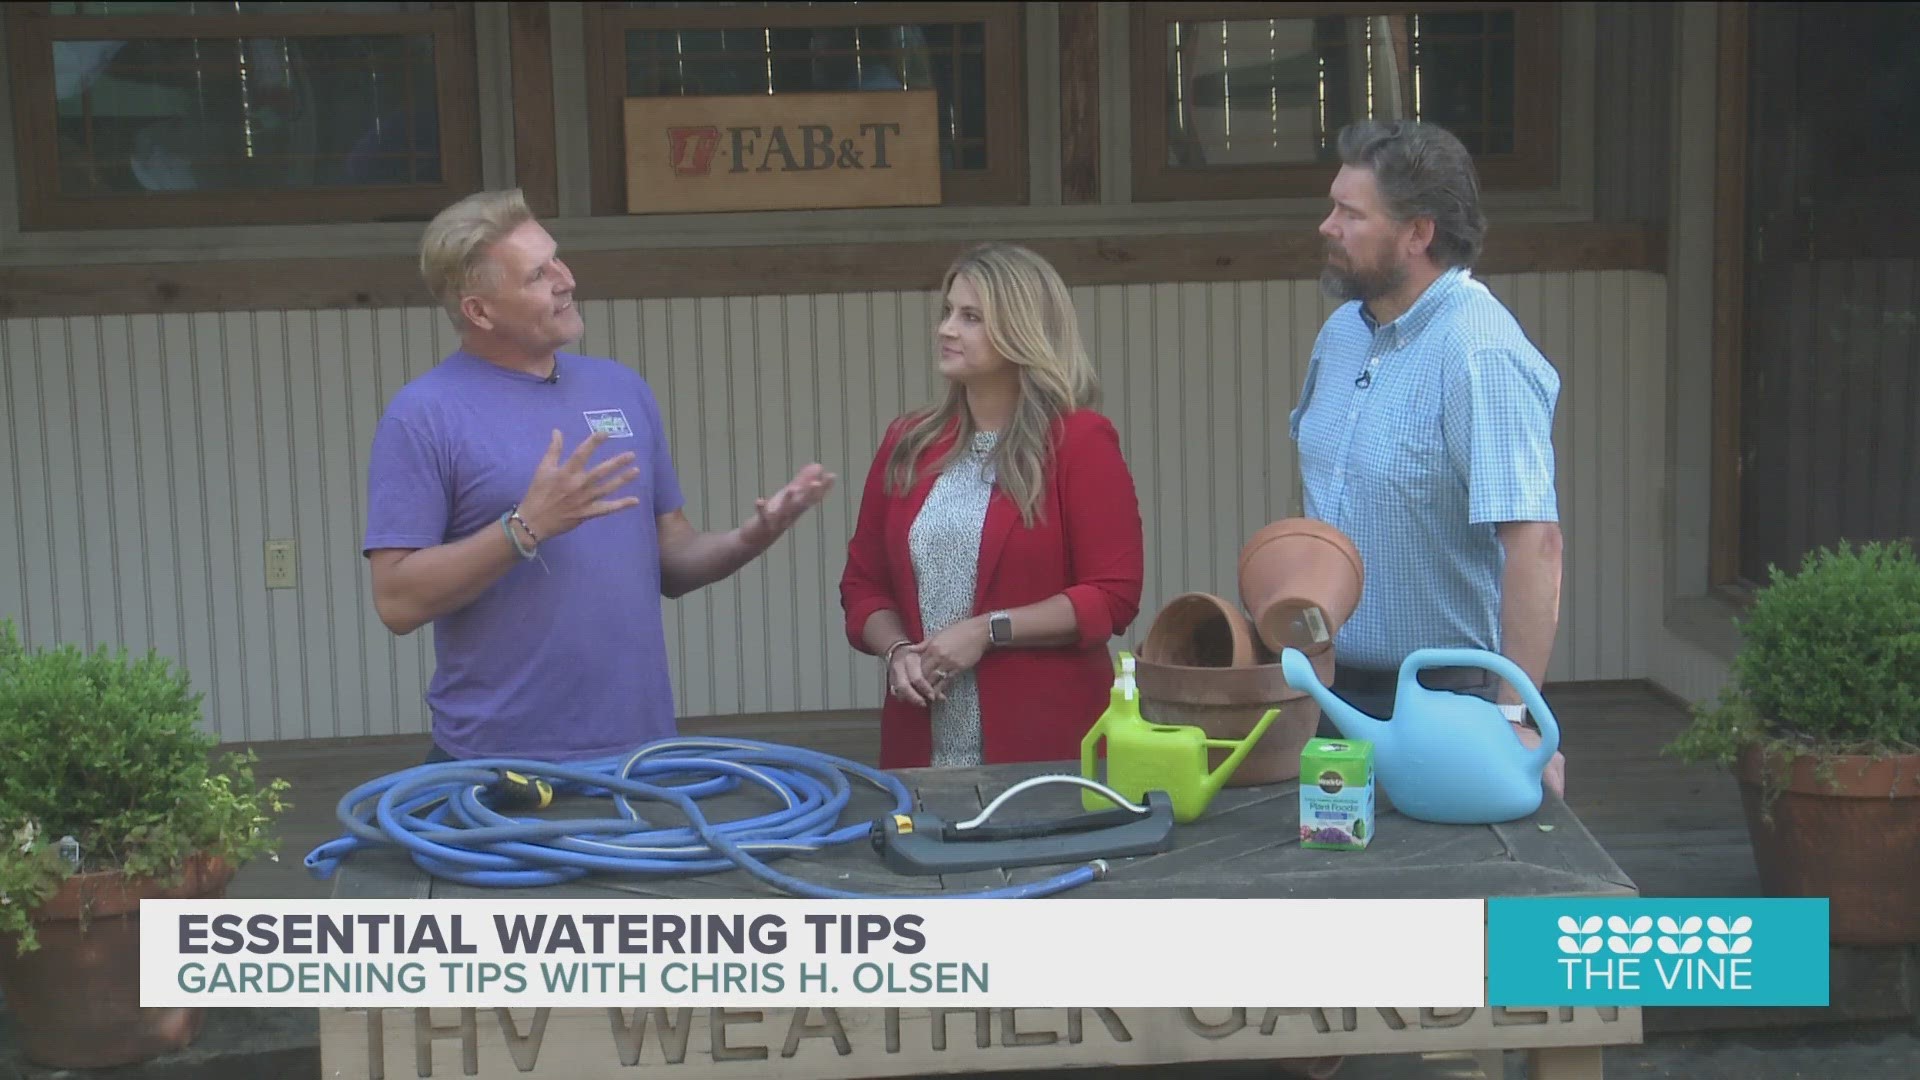 Chris H. Olsen is here with all the tips you need to keep your plants alive this summer.